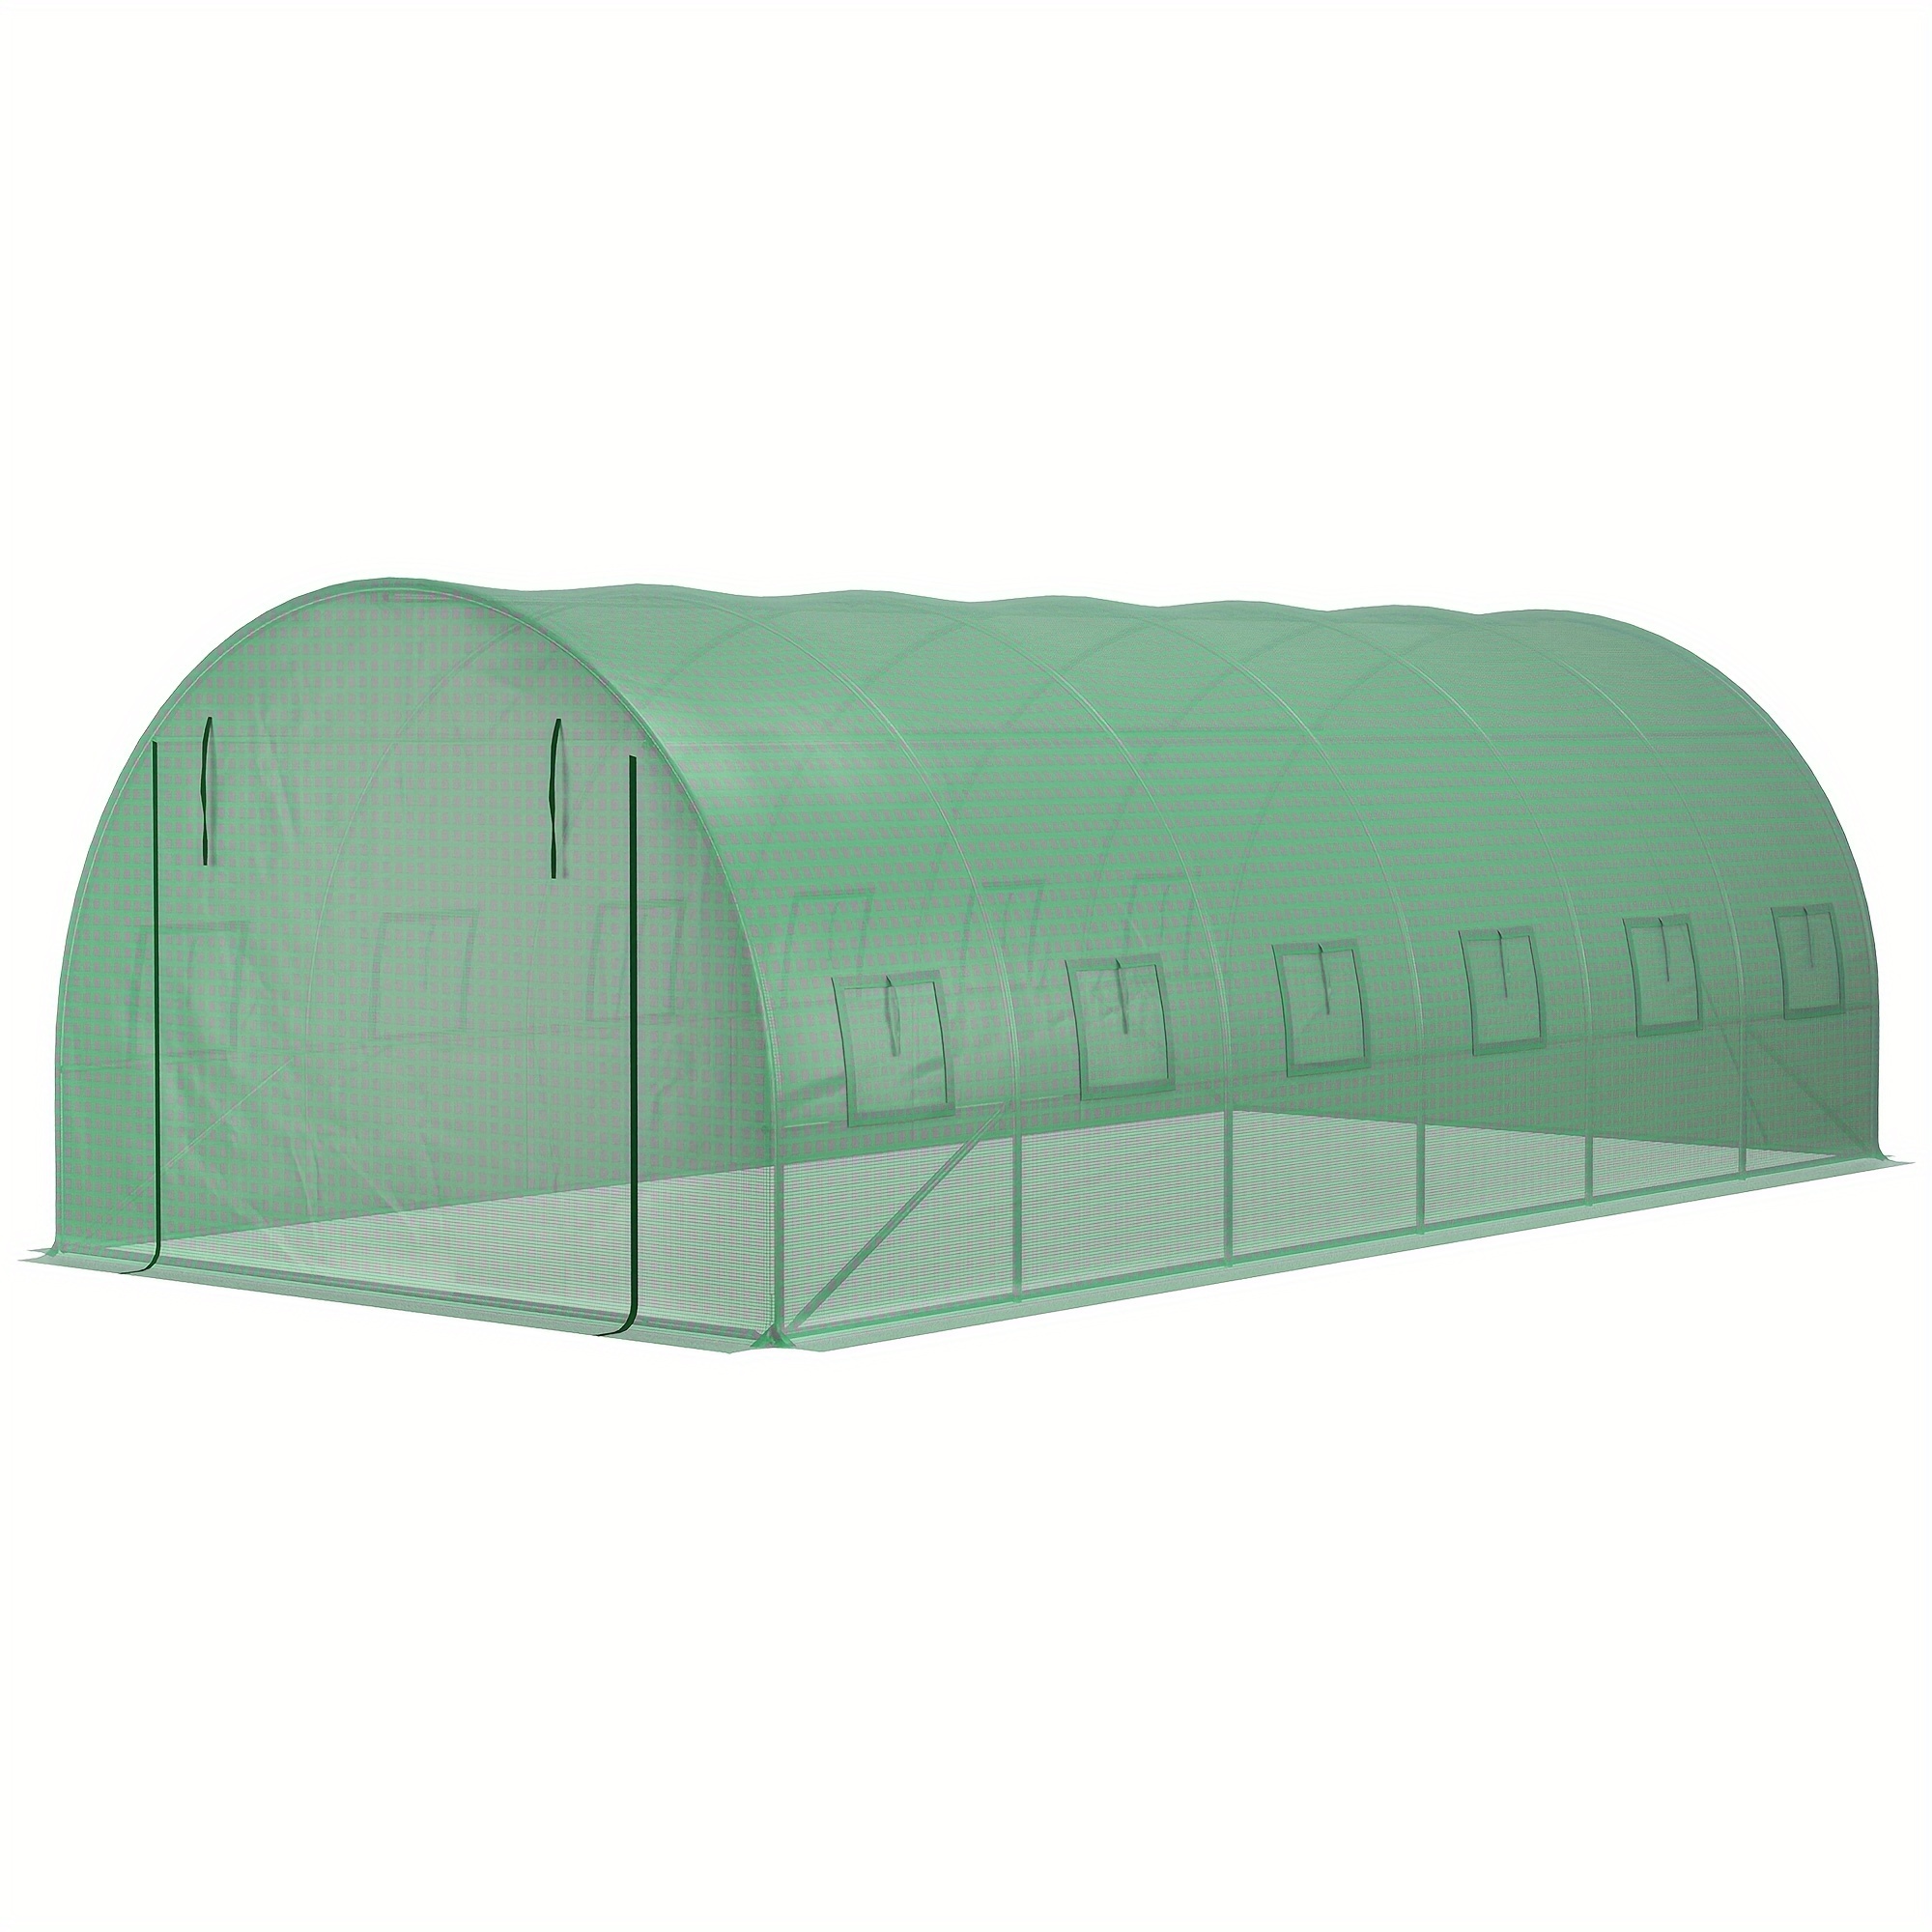 

Outsunny 19.7' X 9.8' X 6.6' Plastic Greenhouse Cover Replacement, Heavy Duty Waterproof Tarp For Hoop House, Sheeting With 12 Windows, Door & Reinforcement Grid, Green